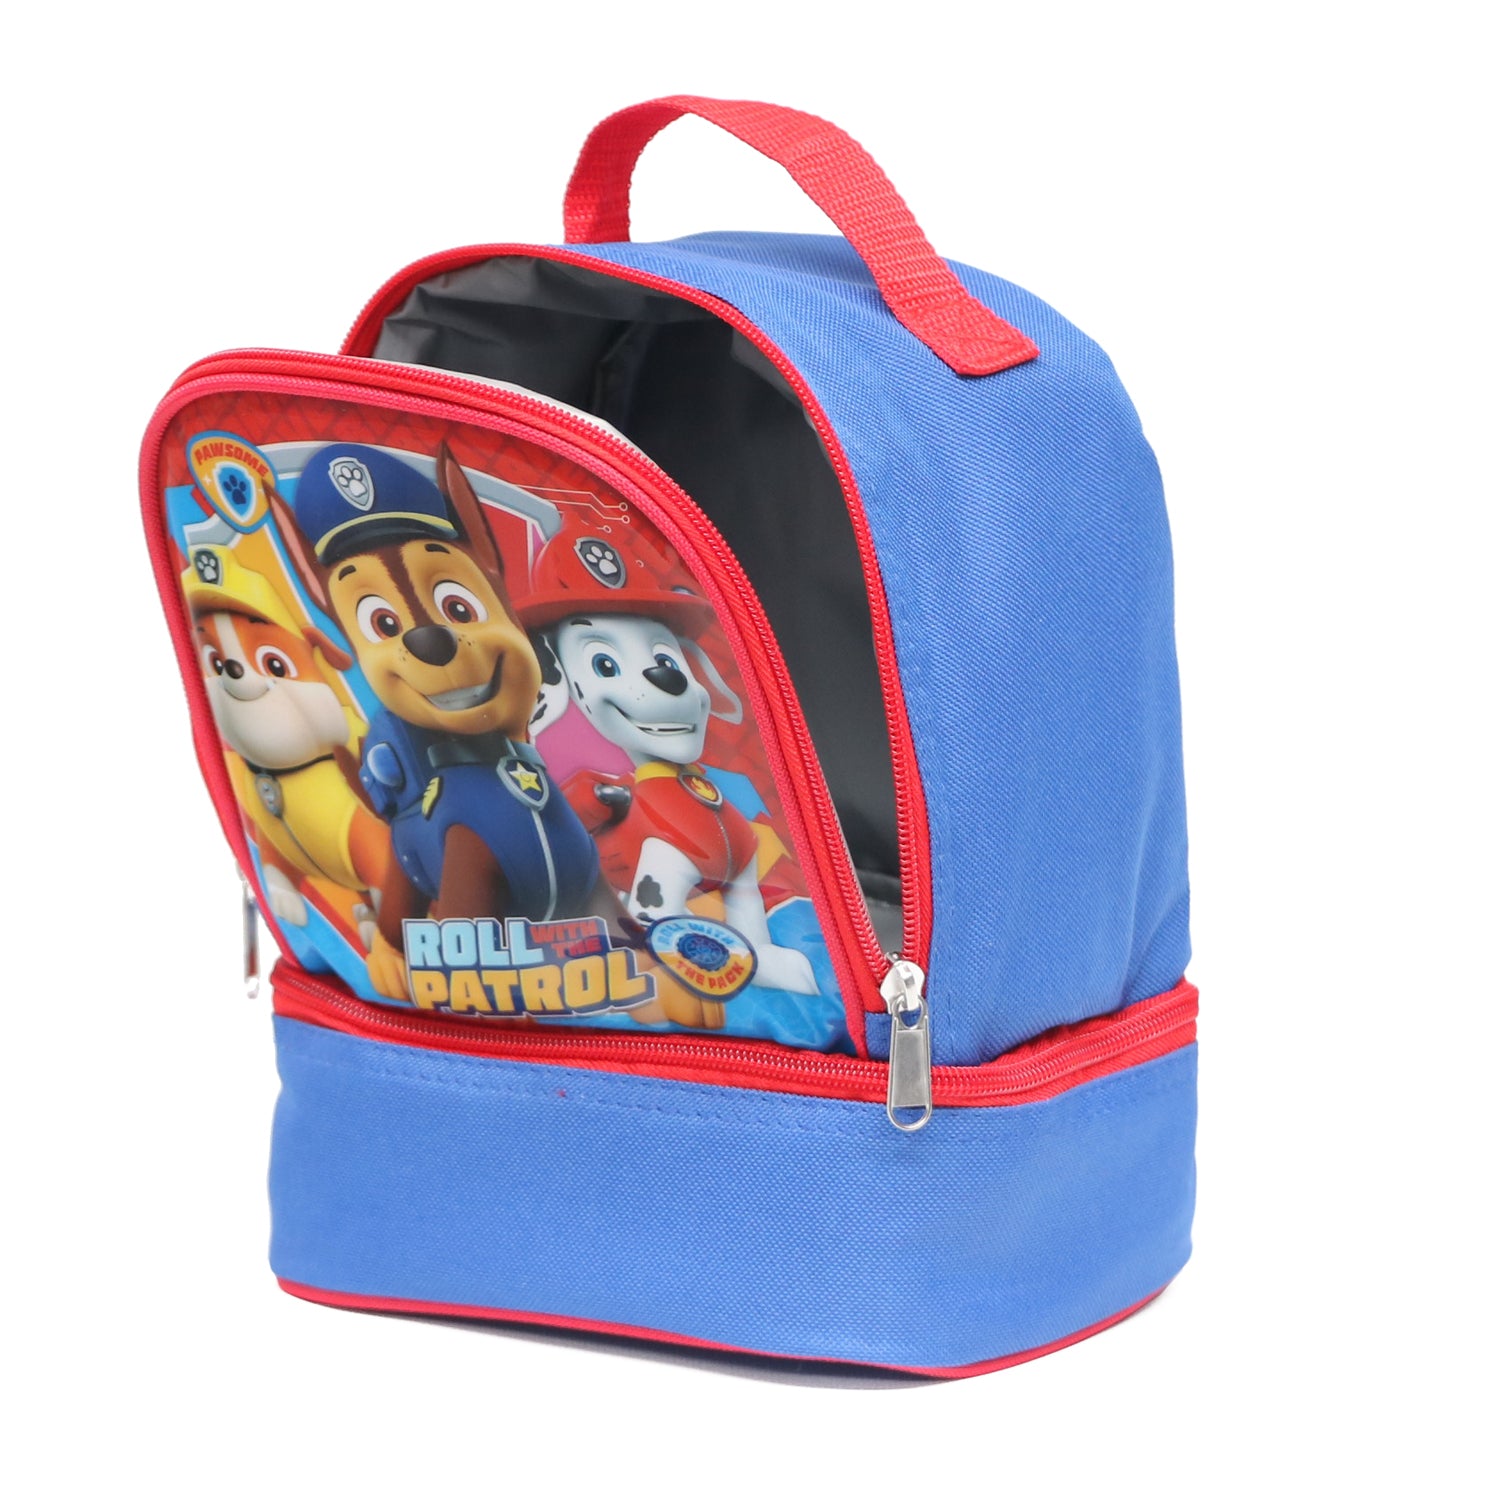 Nickelodeon Paw Patrol Dual Compartment Dome Lunch Box